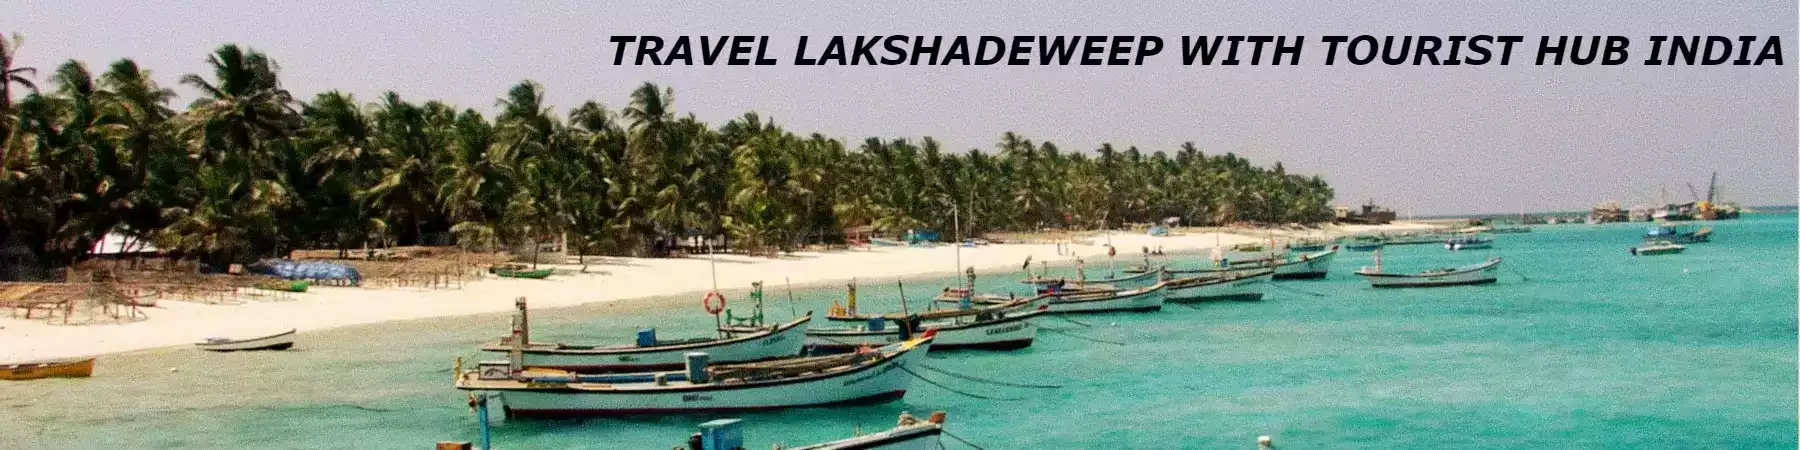 Lakshadweep holiday packages from Pune with Tourist Hub India - The Best Lakshadweep Travel Agency